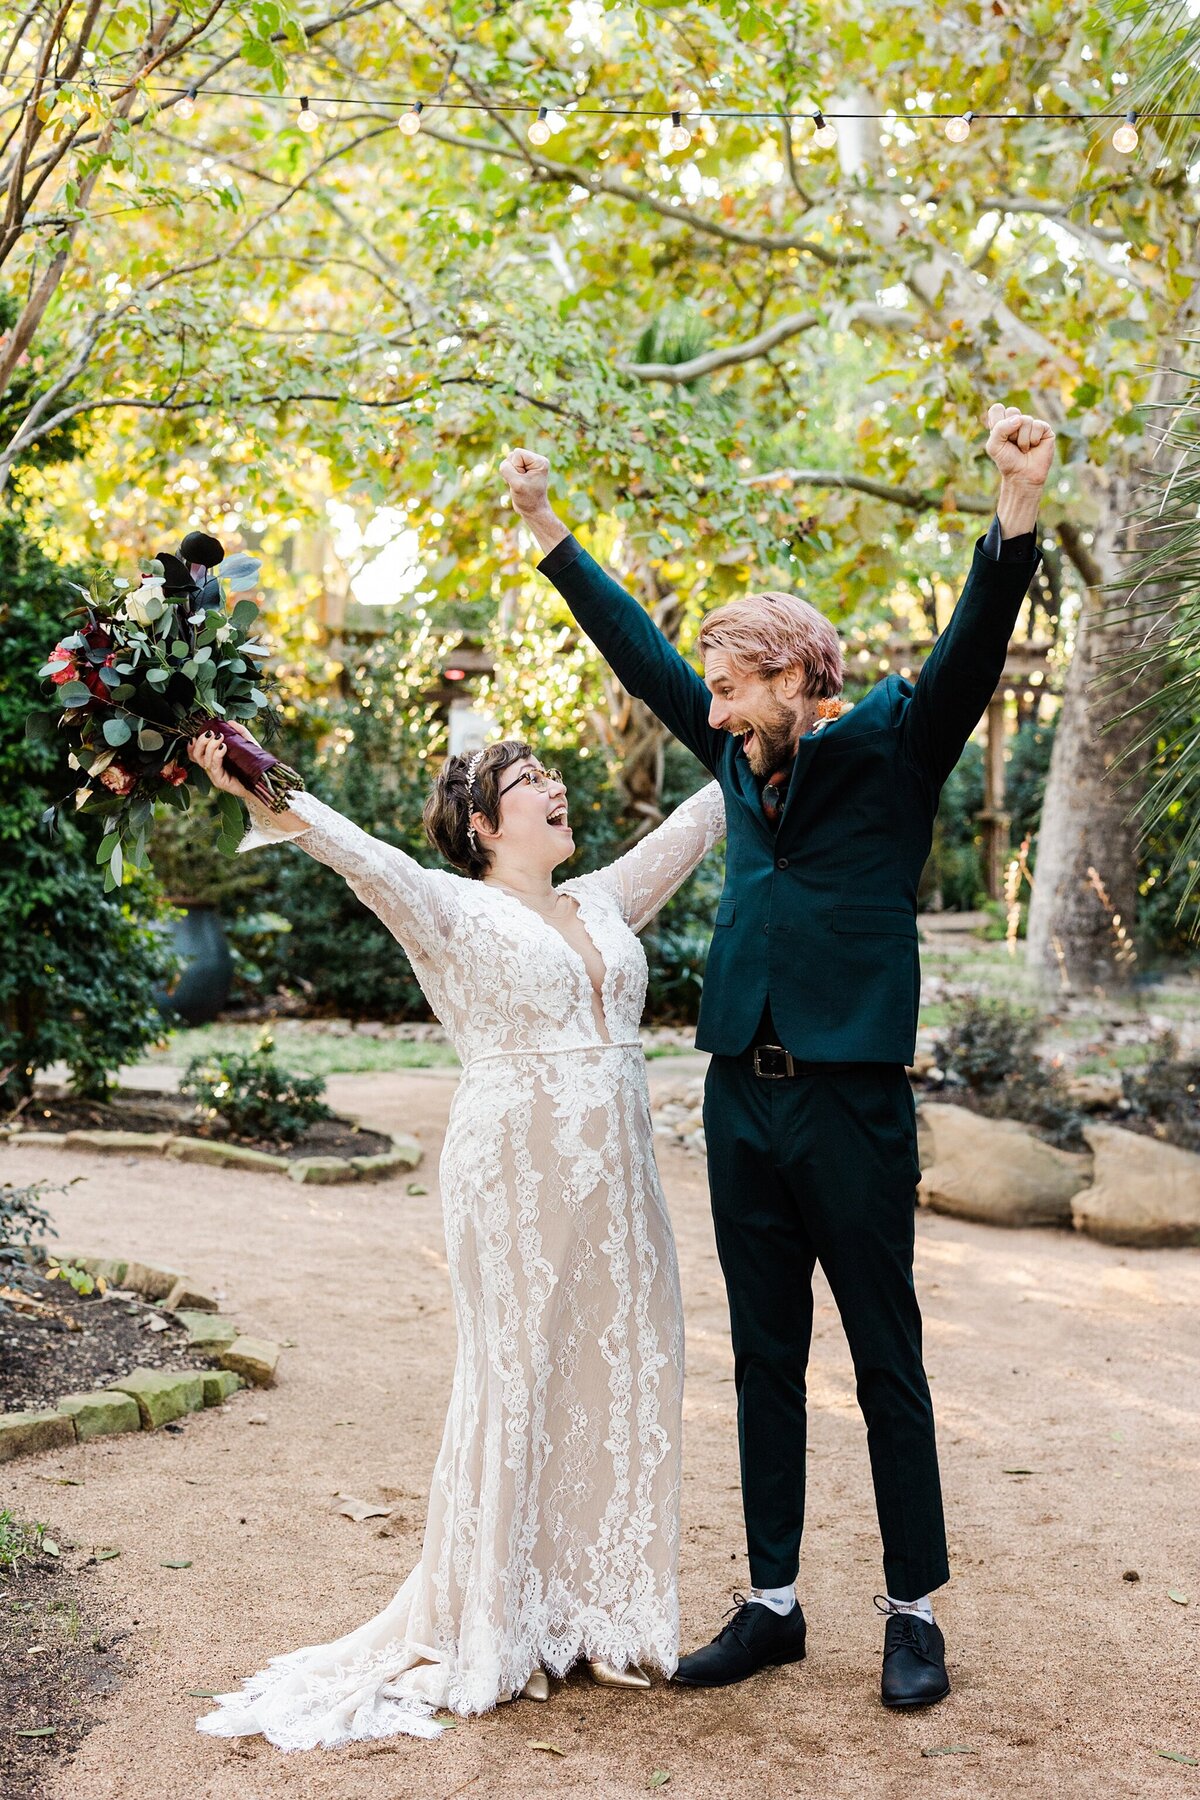 A fun, playful portrait of a bride and groom cheering triumphantly after their wedding ceremony in Dallas, Texas. The bride is on the left and is wearing a long sleeve, intricate, white dress with a floral headband and a large bouquet. The groom is wearing a dark suit with a boutonniere. They both hold their arms up in celebration while being framed by many trees and other natural elements.